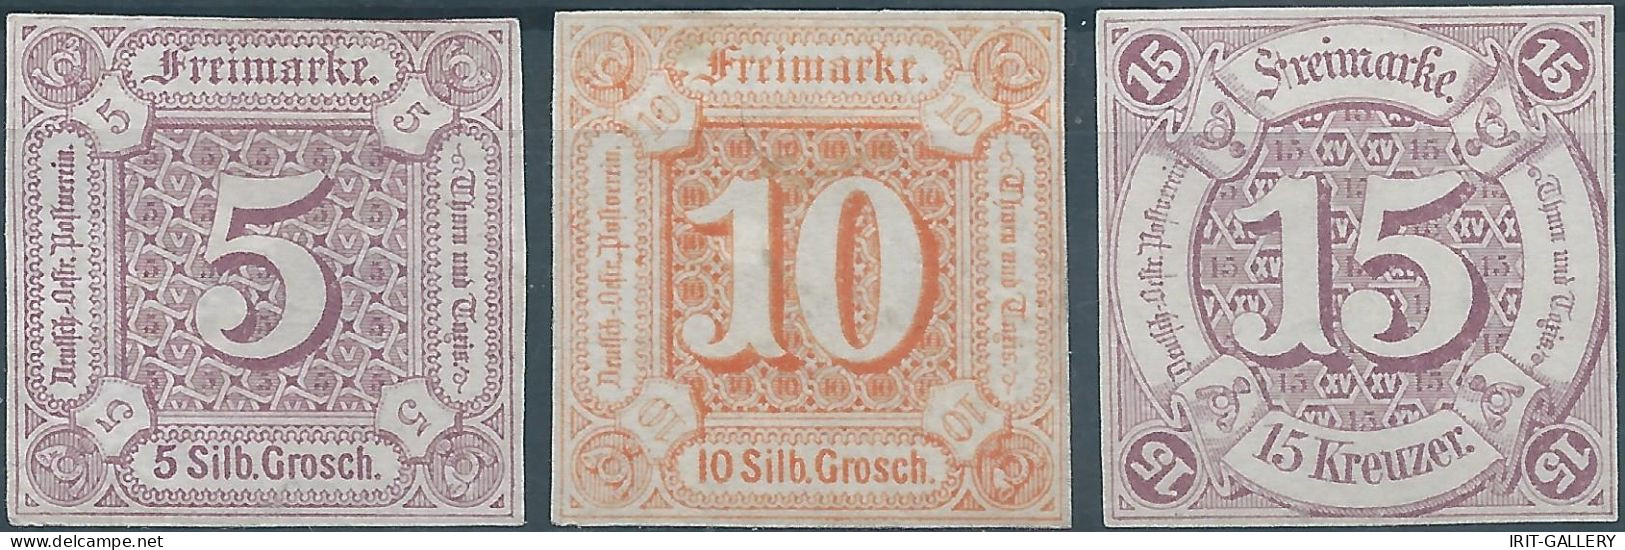 Germany-Deutschland,Thurn Und Taxis,1859 -1861 Colored Print On White Paper,5Sgr - 10Sgr + 15Kr, Imperforated ,Mint - Mint